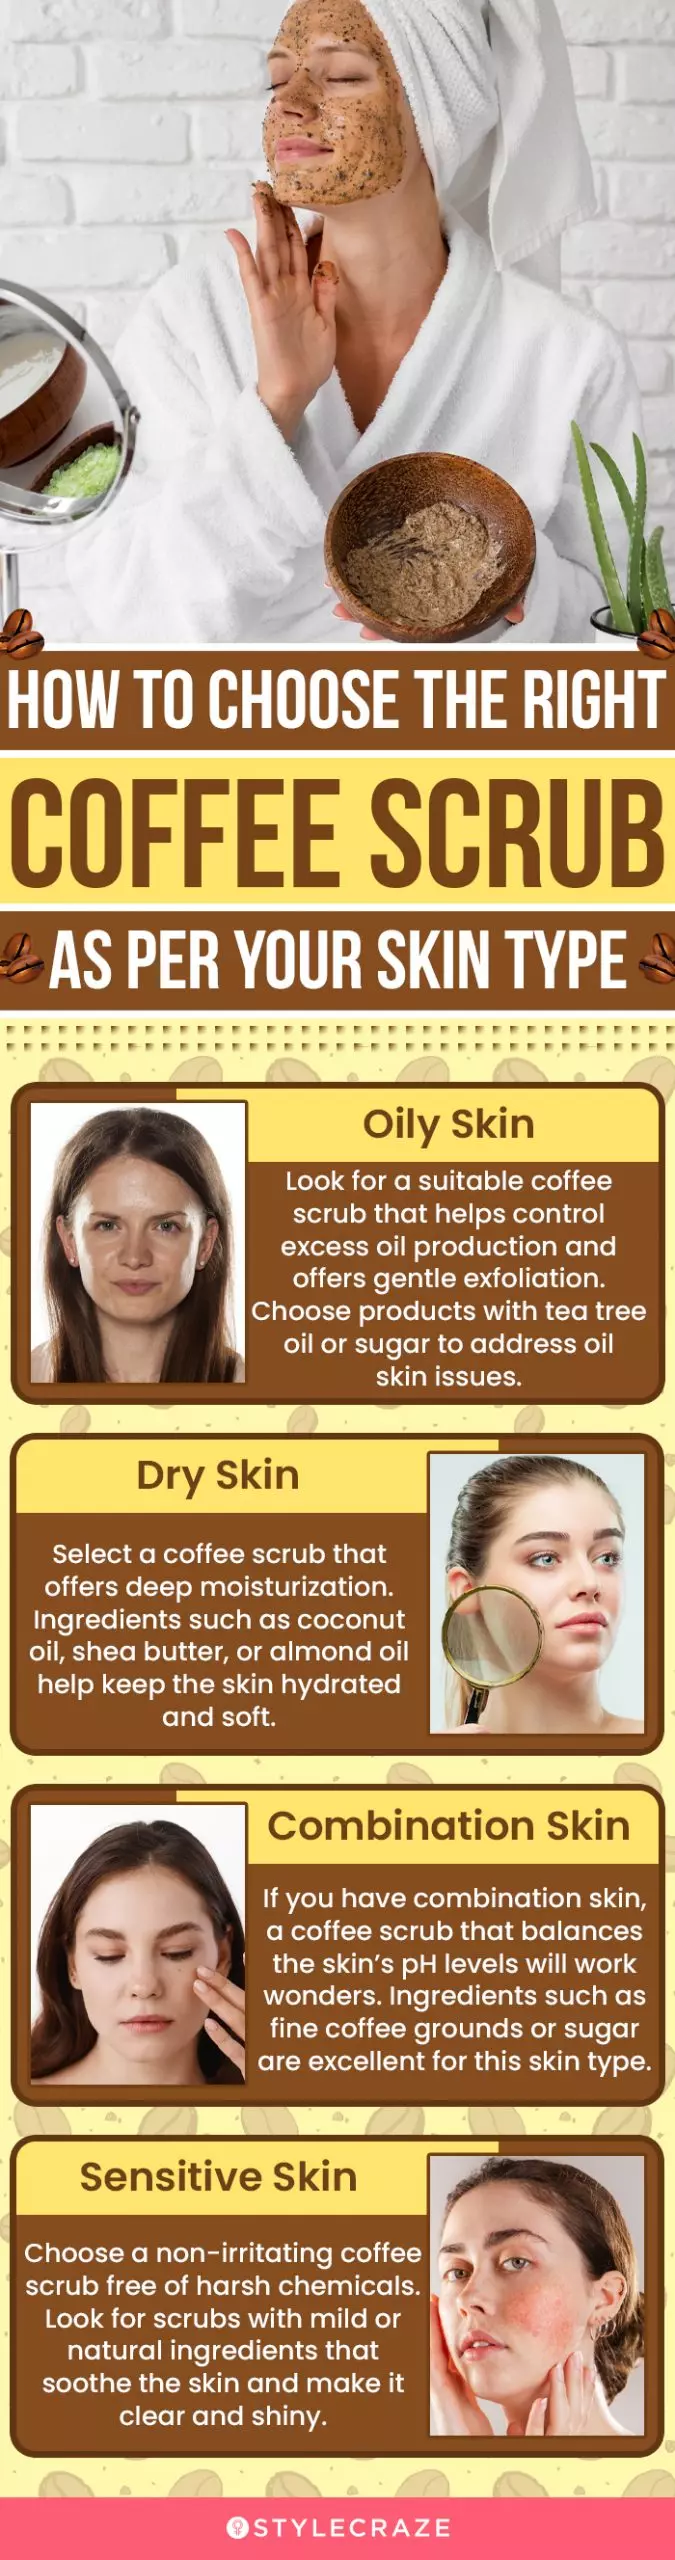 How To Choose The Right Coffee Scrub As Per Your Skin Type (infographic)